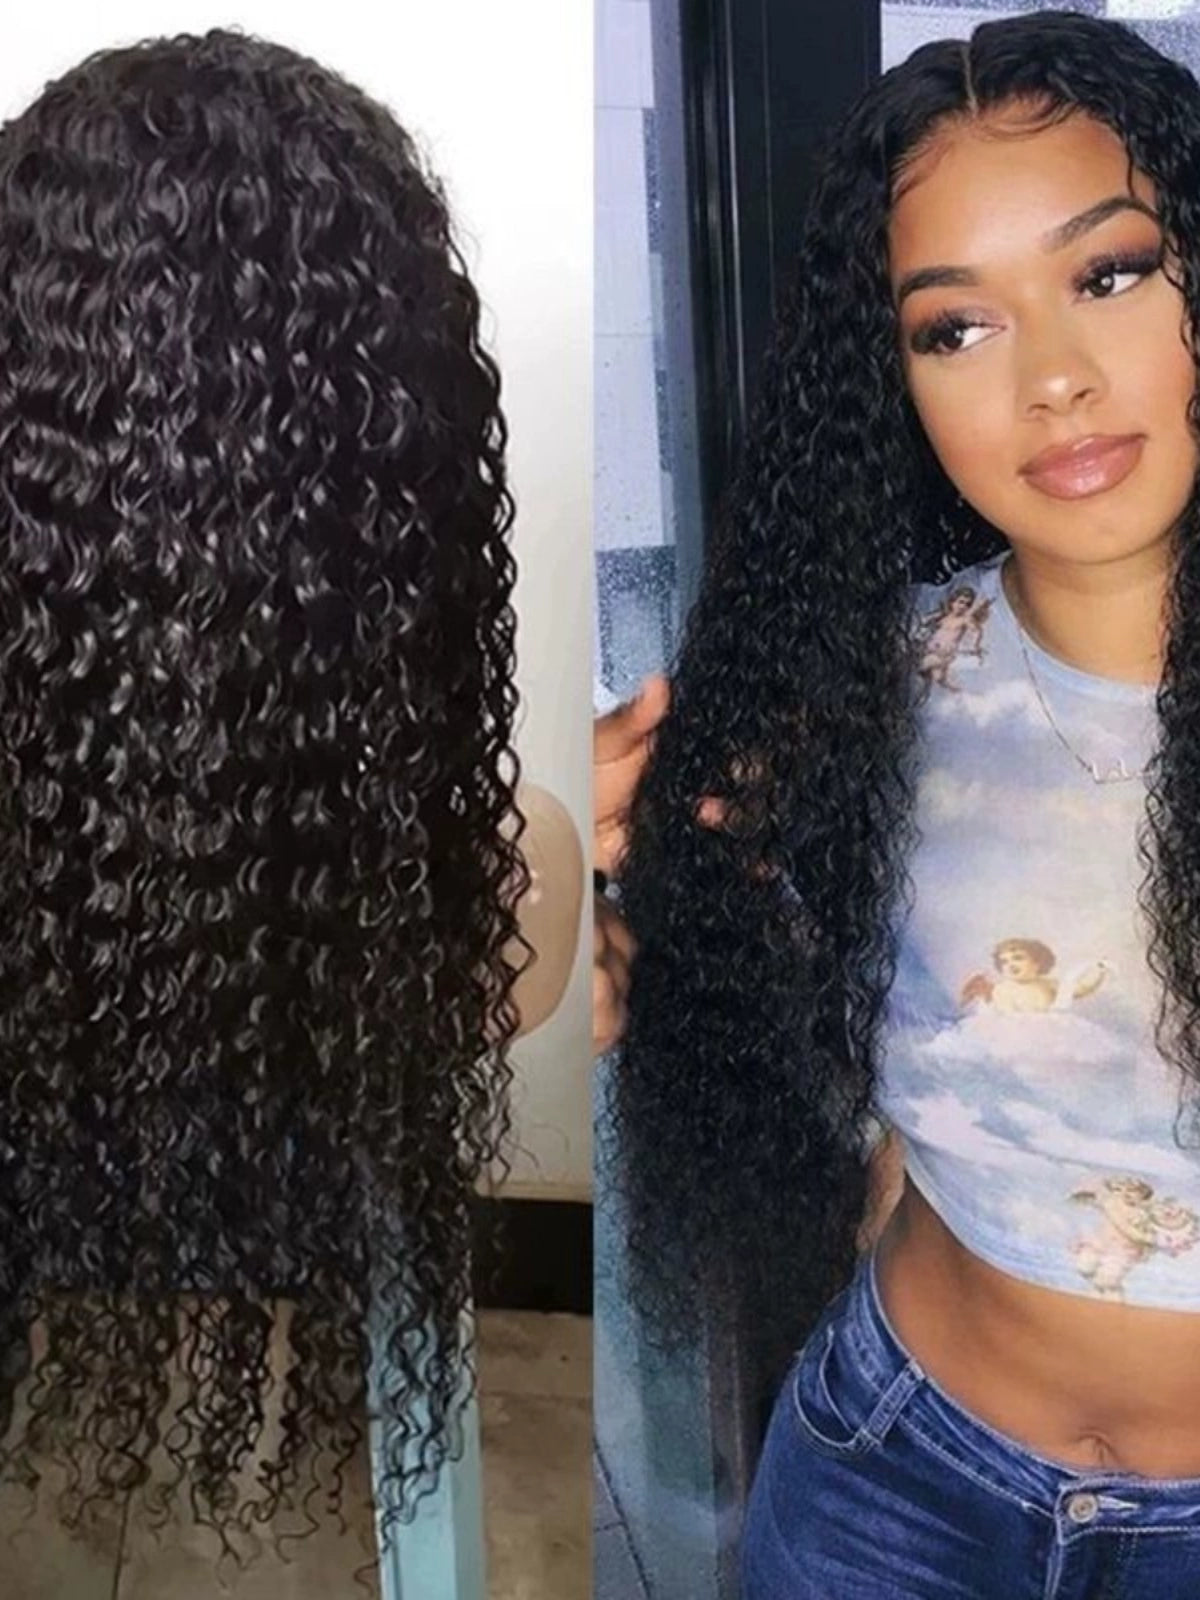 Sale! Brazilian Deep Curly Lace Front Wig Human Hair Wig